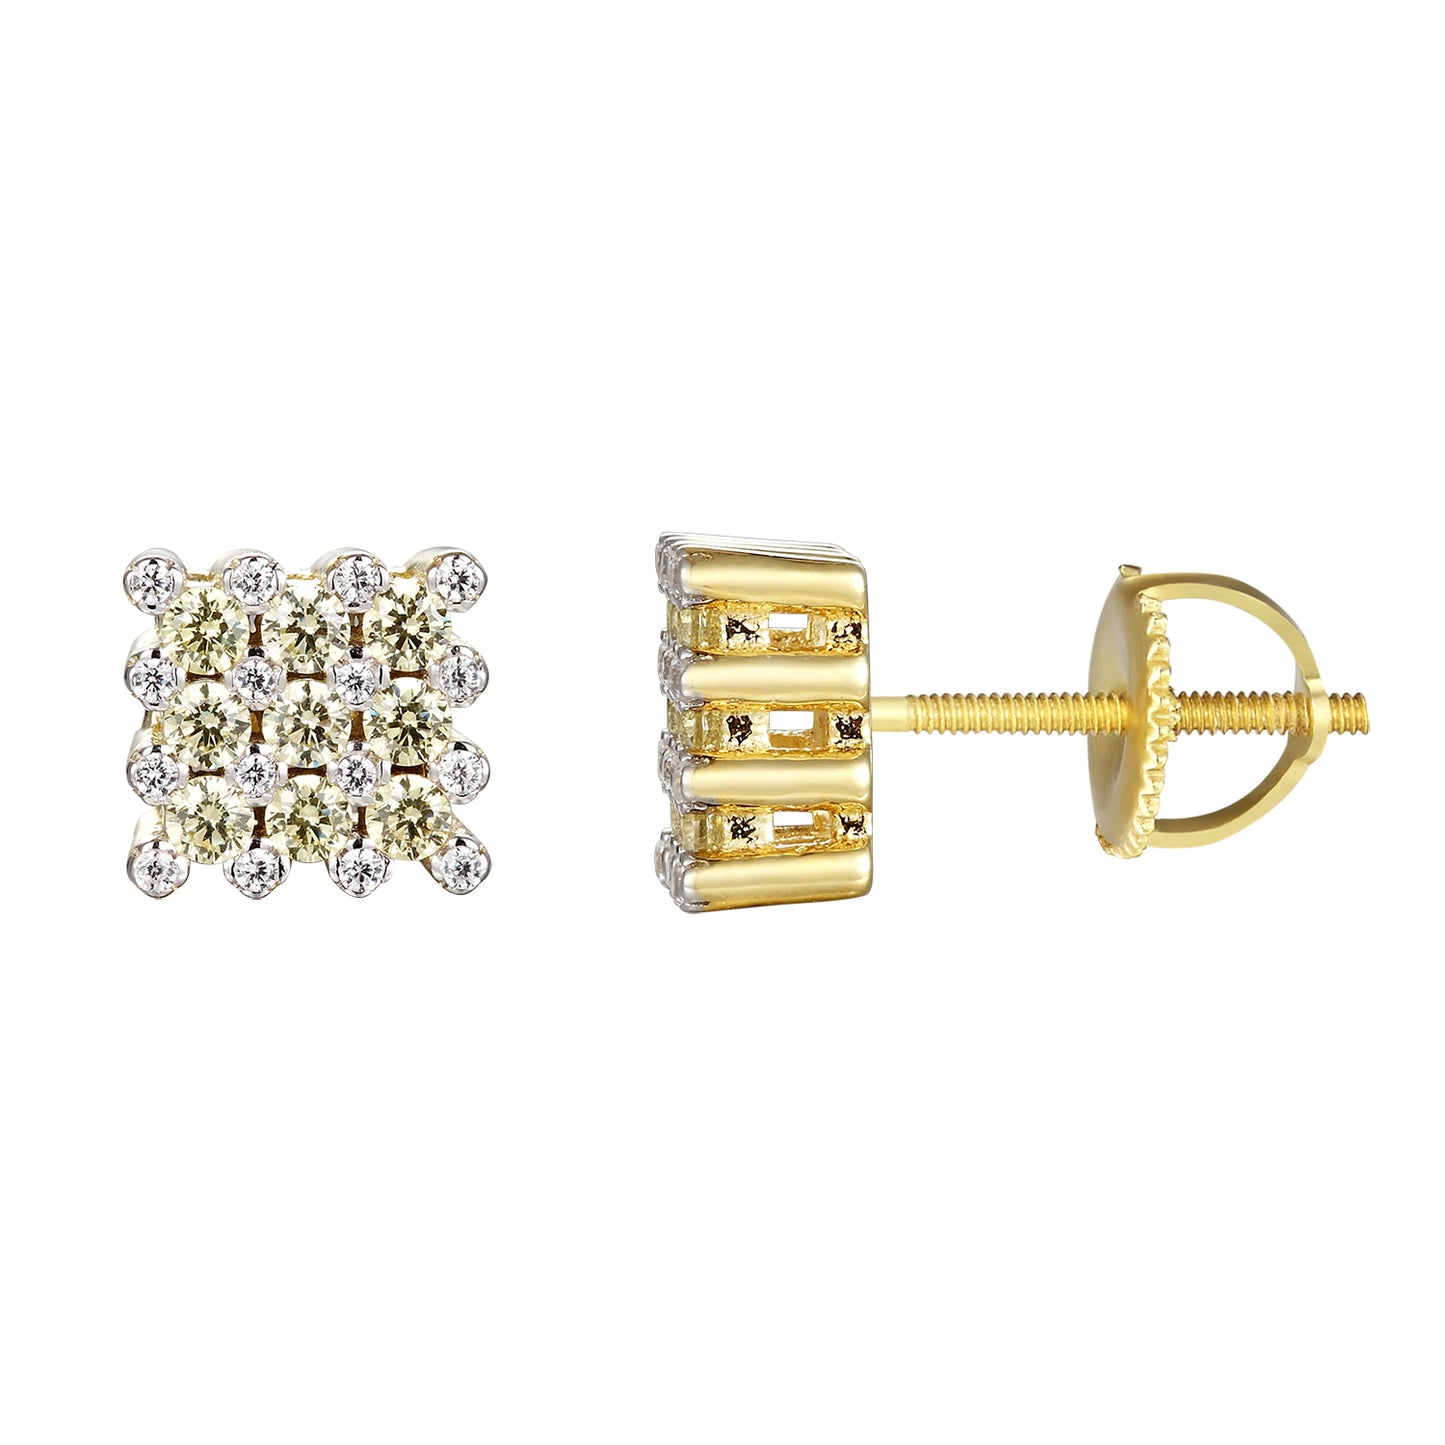 Two Tone Canary Silver Square Stud Earrings 